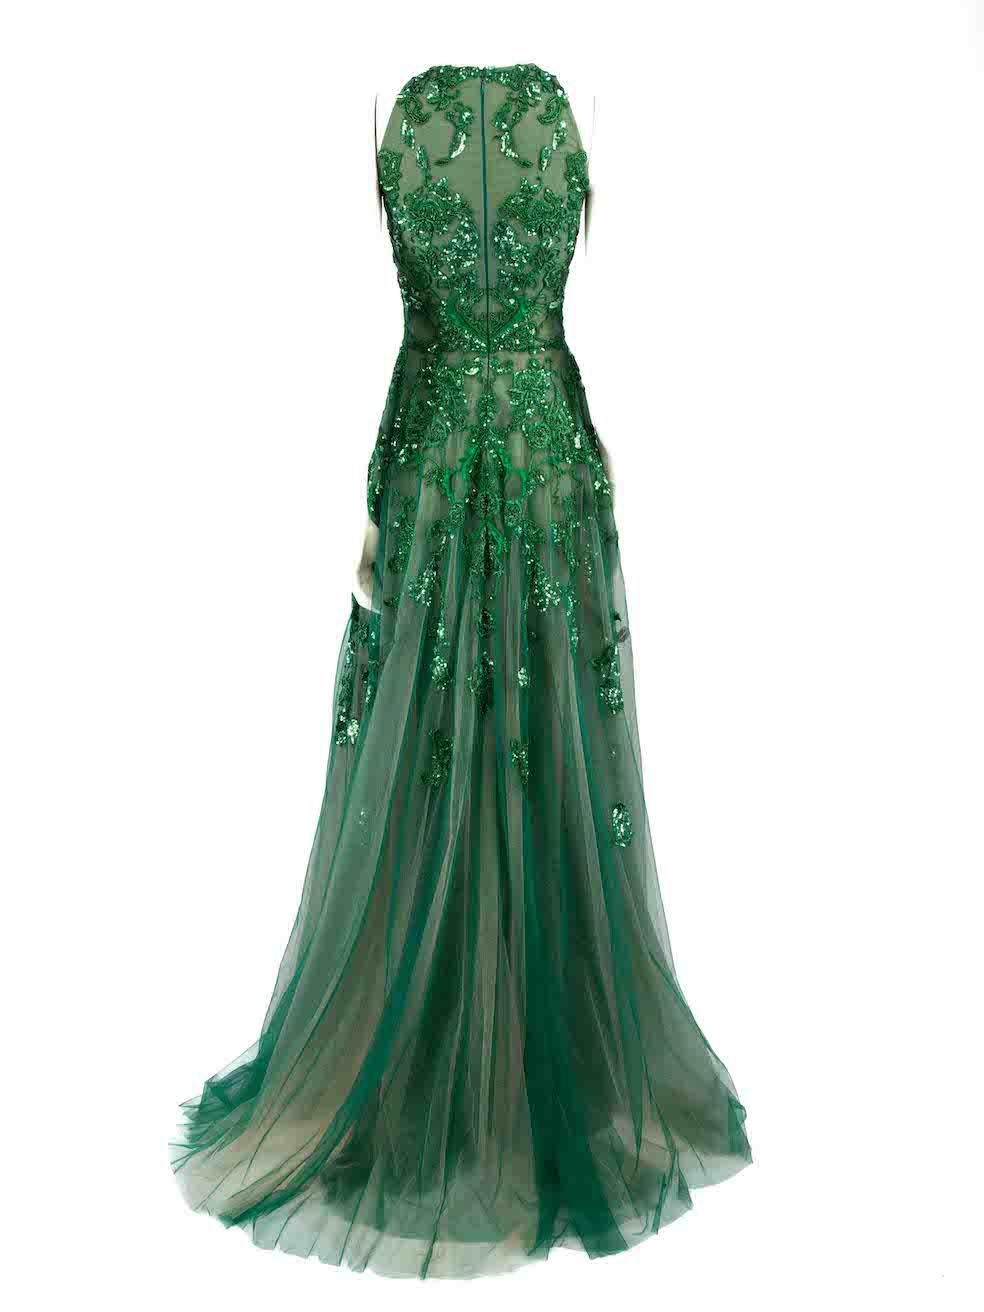 Women's Honayda AW22 Green Tulle Floral Embellished Gown Size S For Sale